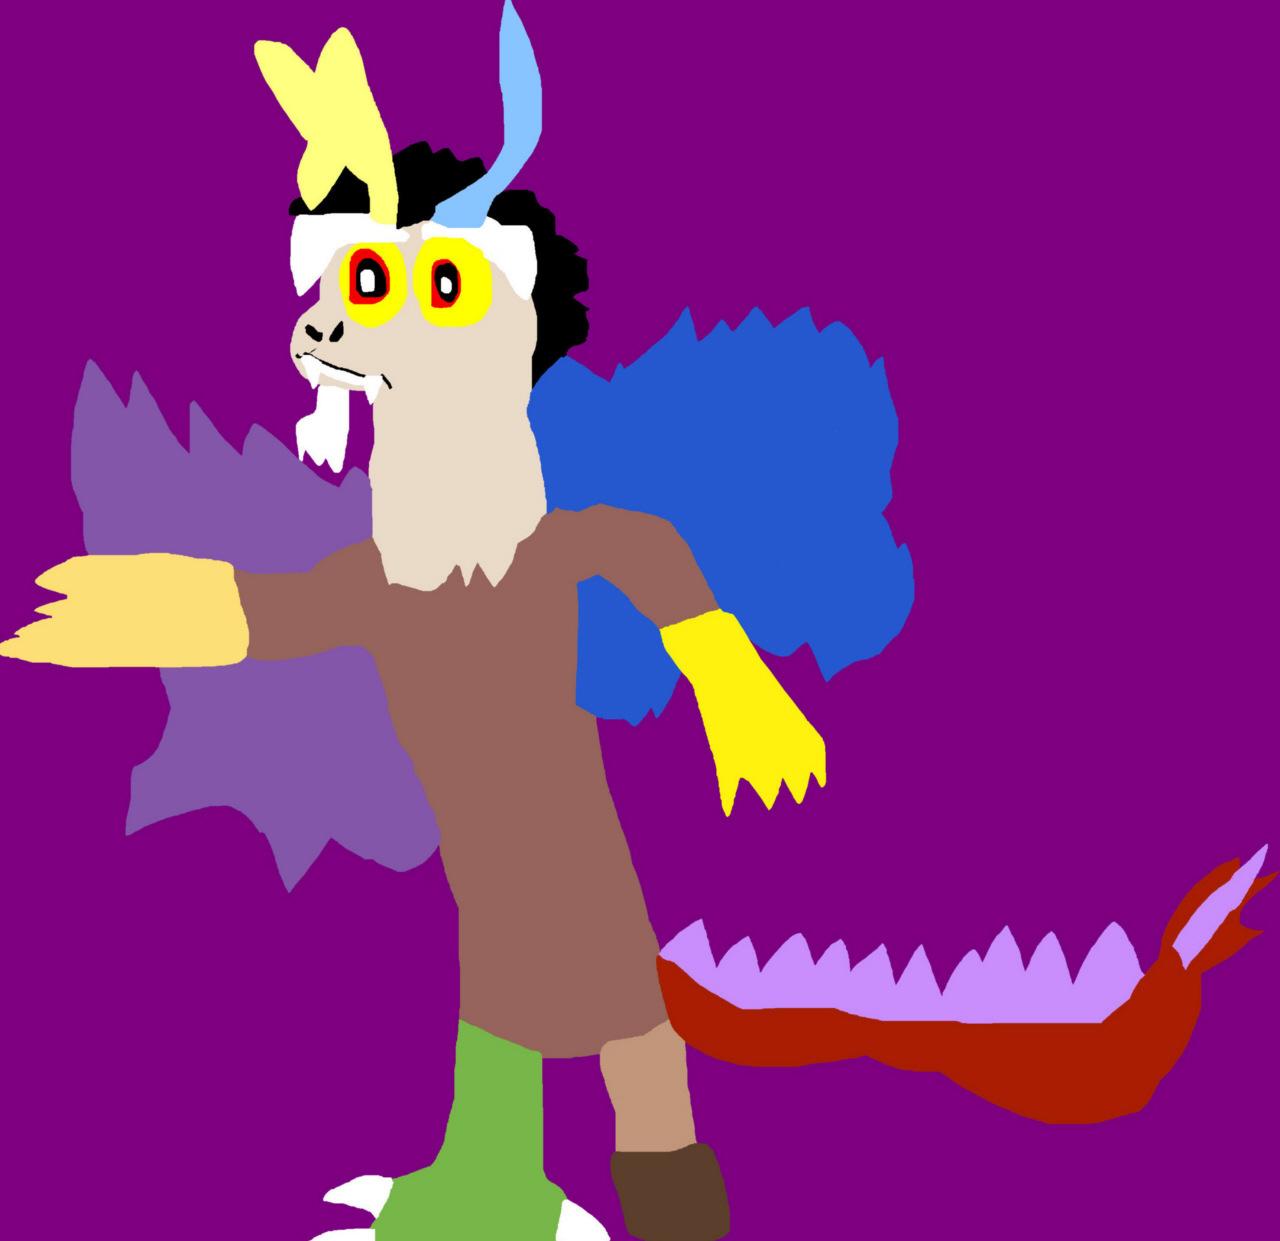 Discord Derp New For 2016 MS Paint by Falconlobo